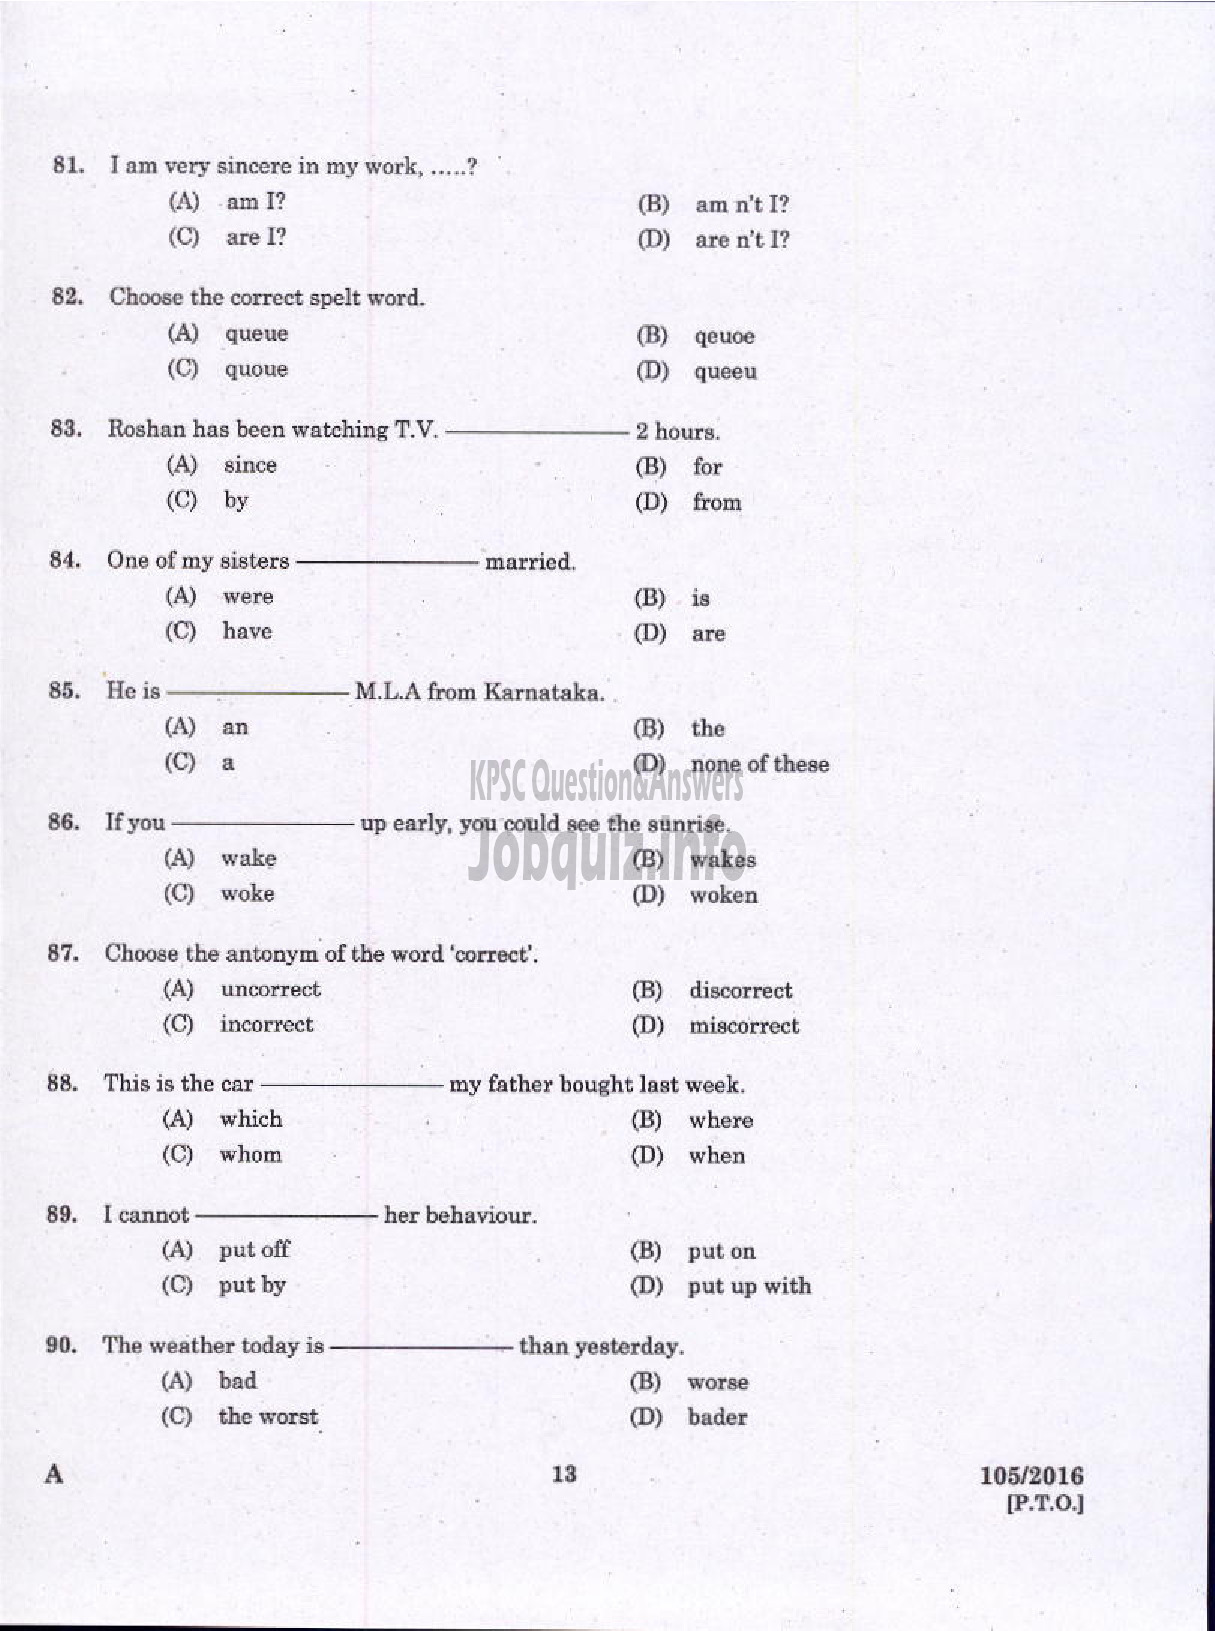 Kerala PSC Question Paper - LOWER DIVISION CLERK KANNADA AND MALAYALAM KNOWING VARIOUS-11